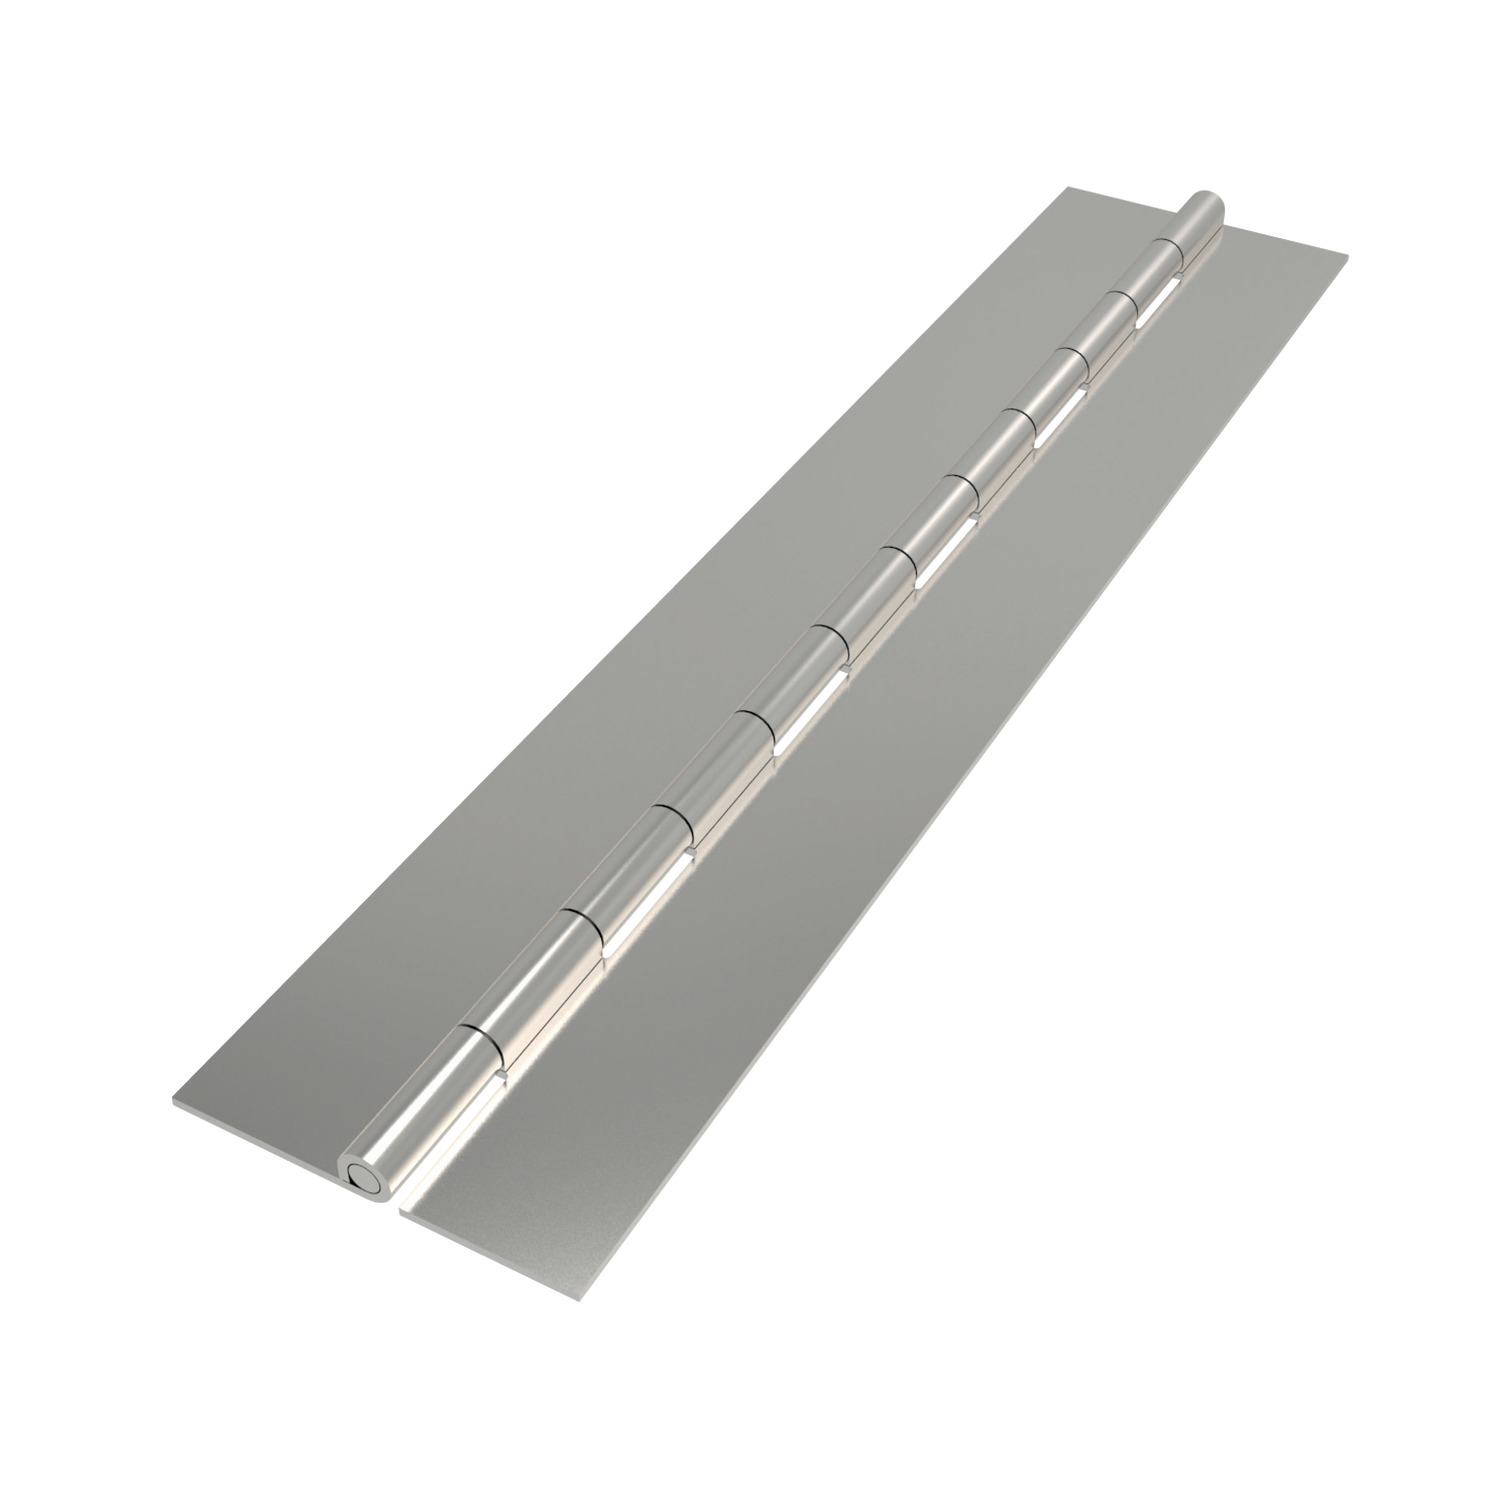 S0050.AC0206 Surface Mount - Piano Hinges Weld on - Stainless steel. 1000 x 25